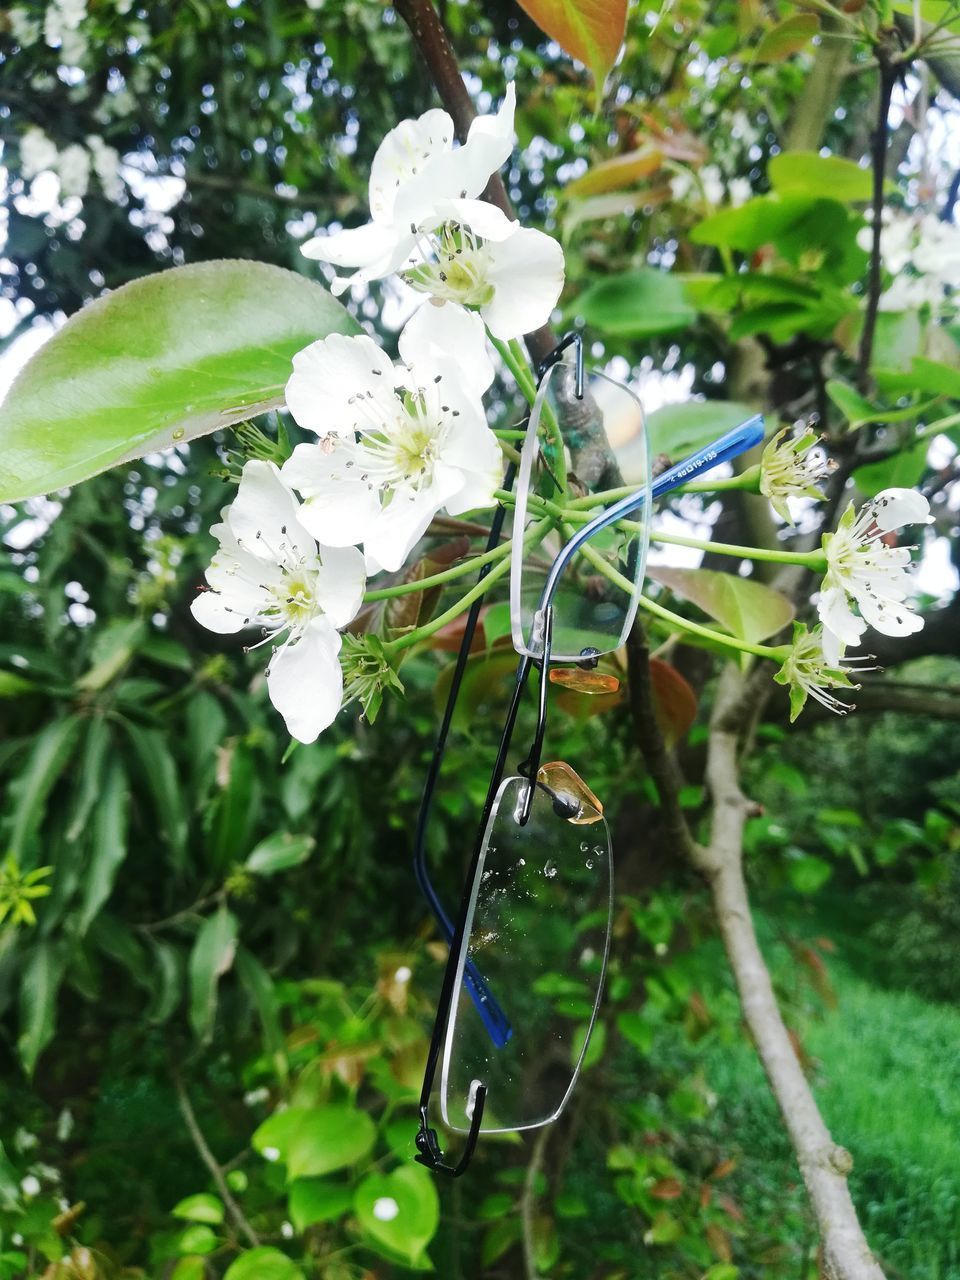 CLOSE-UP OF WHITE FLOWERING PLANT WITH TREE